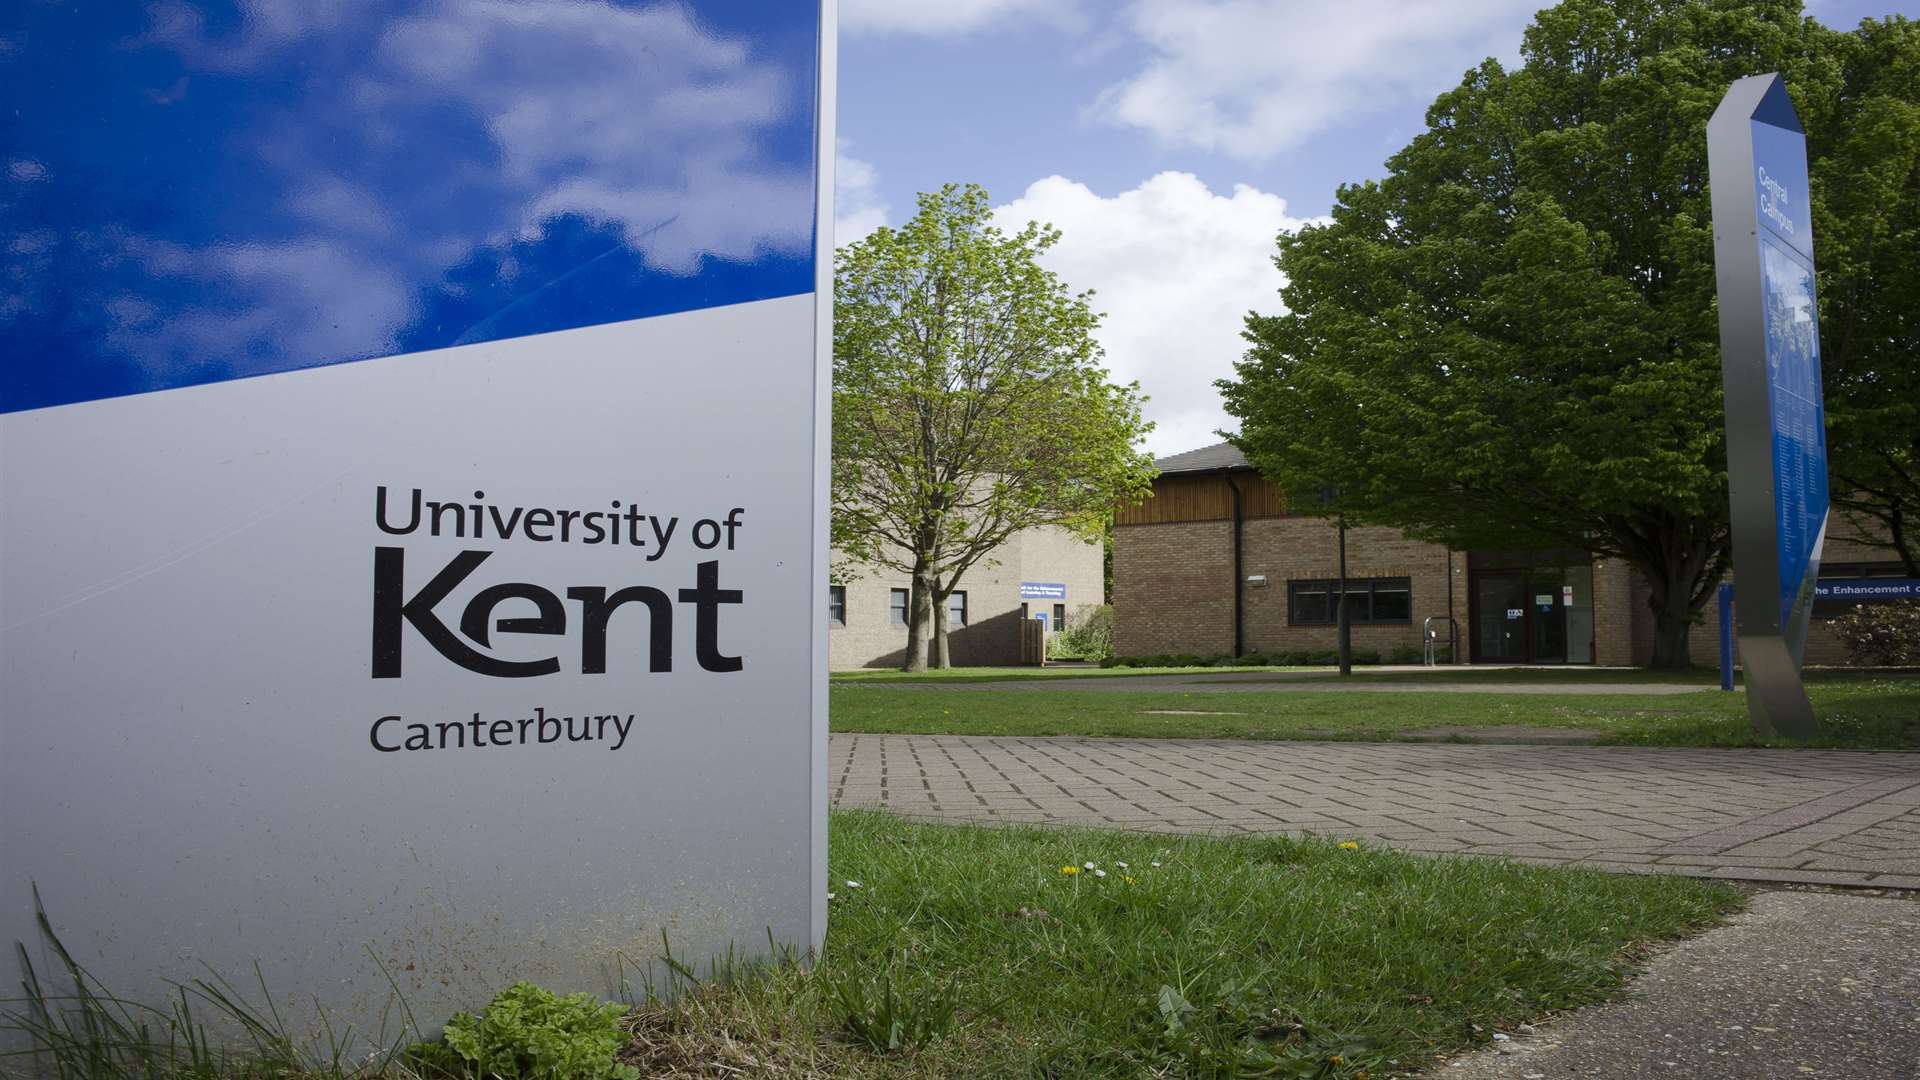 The University of Kent campus in Canterbury